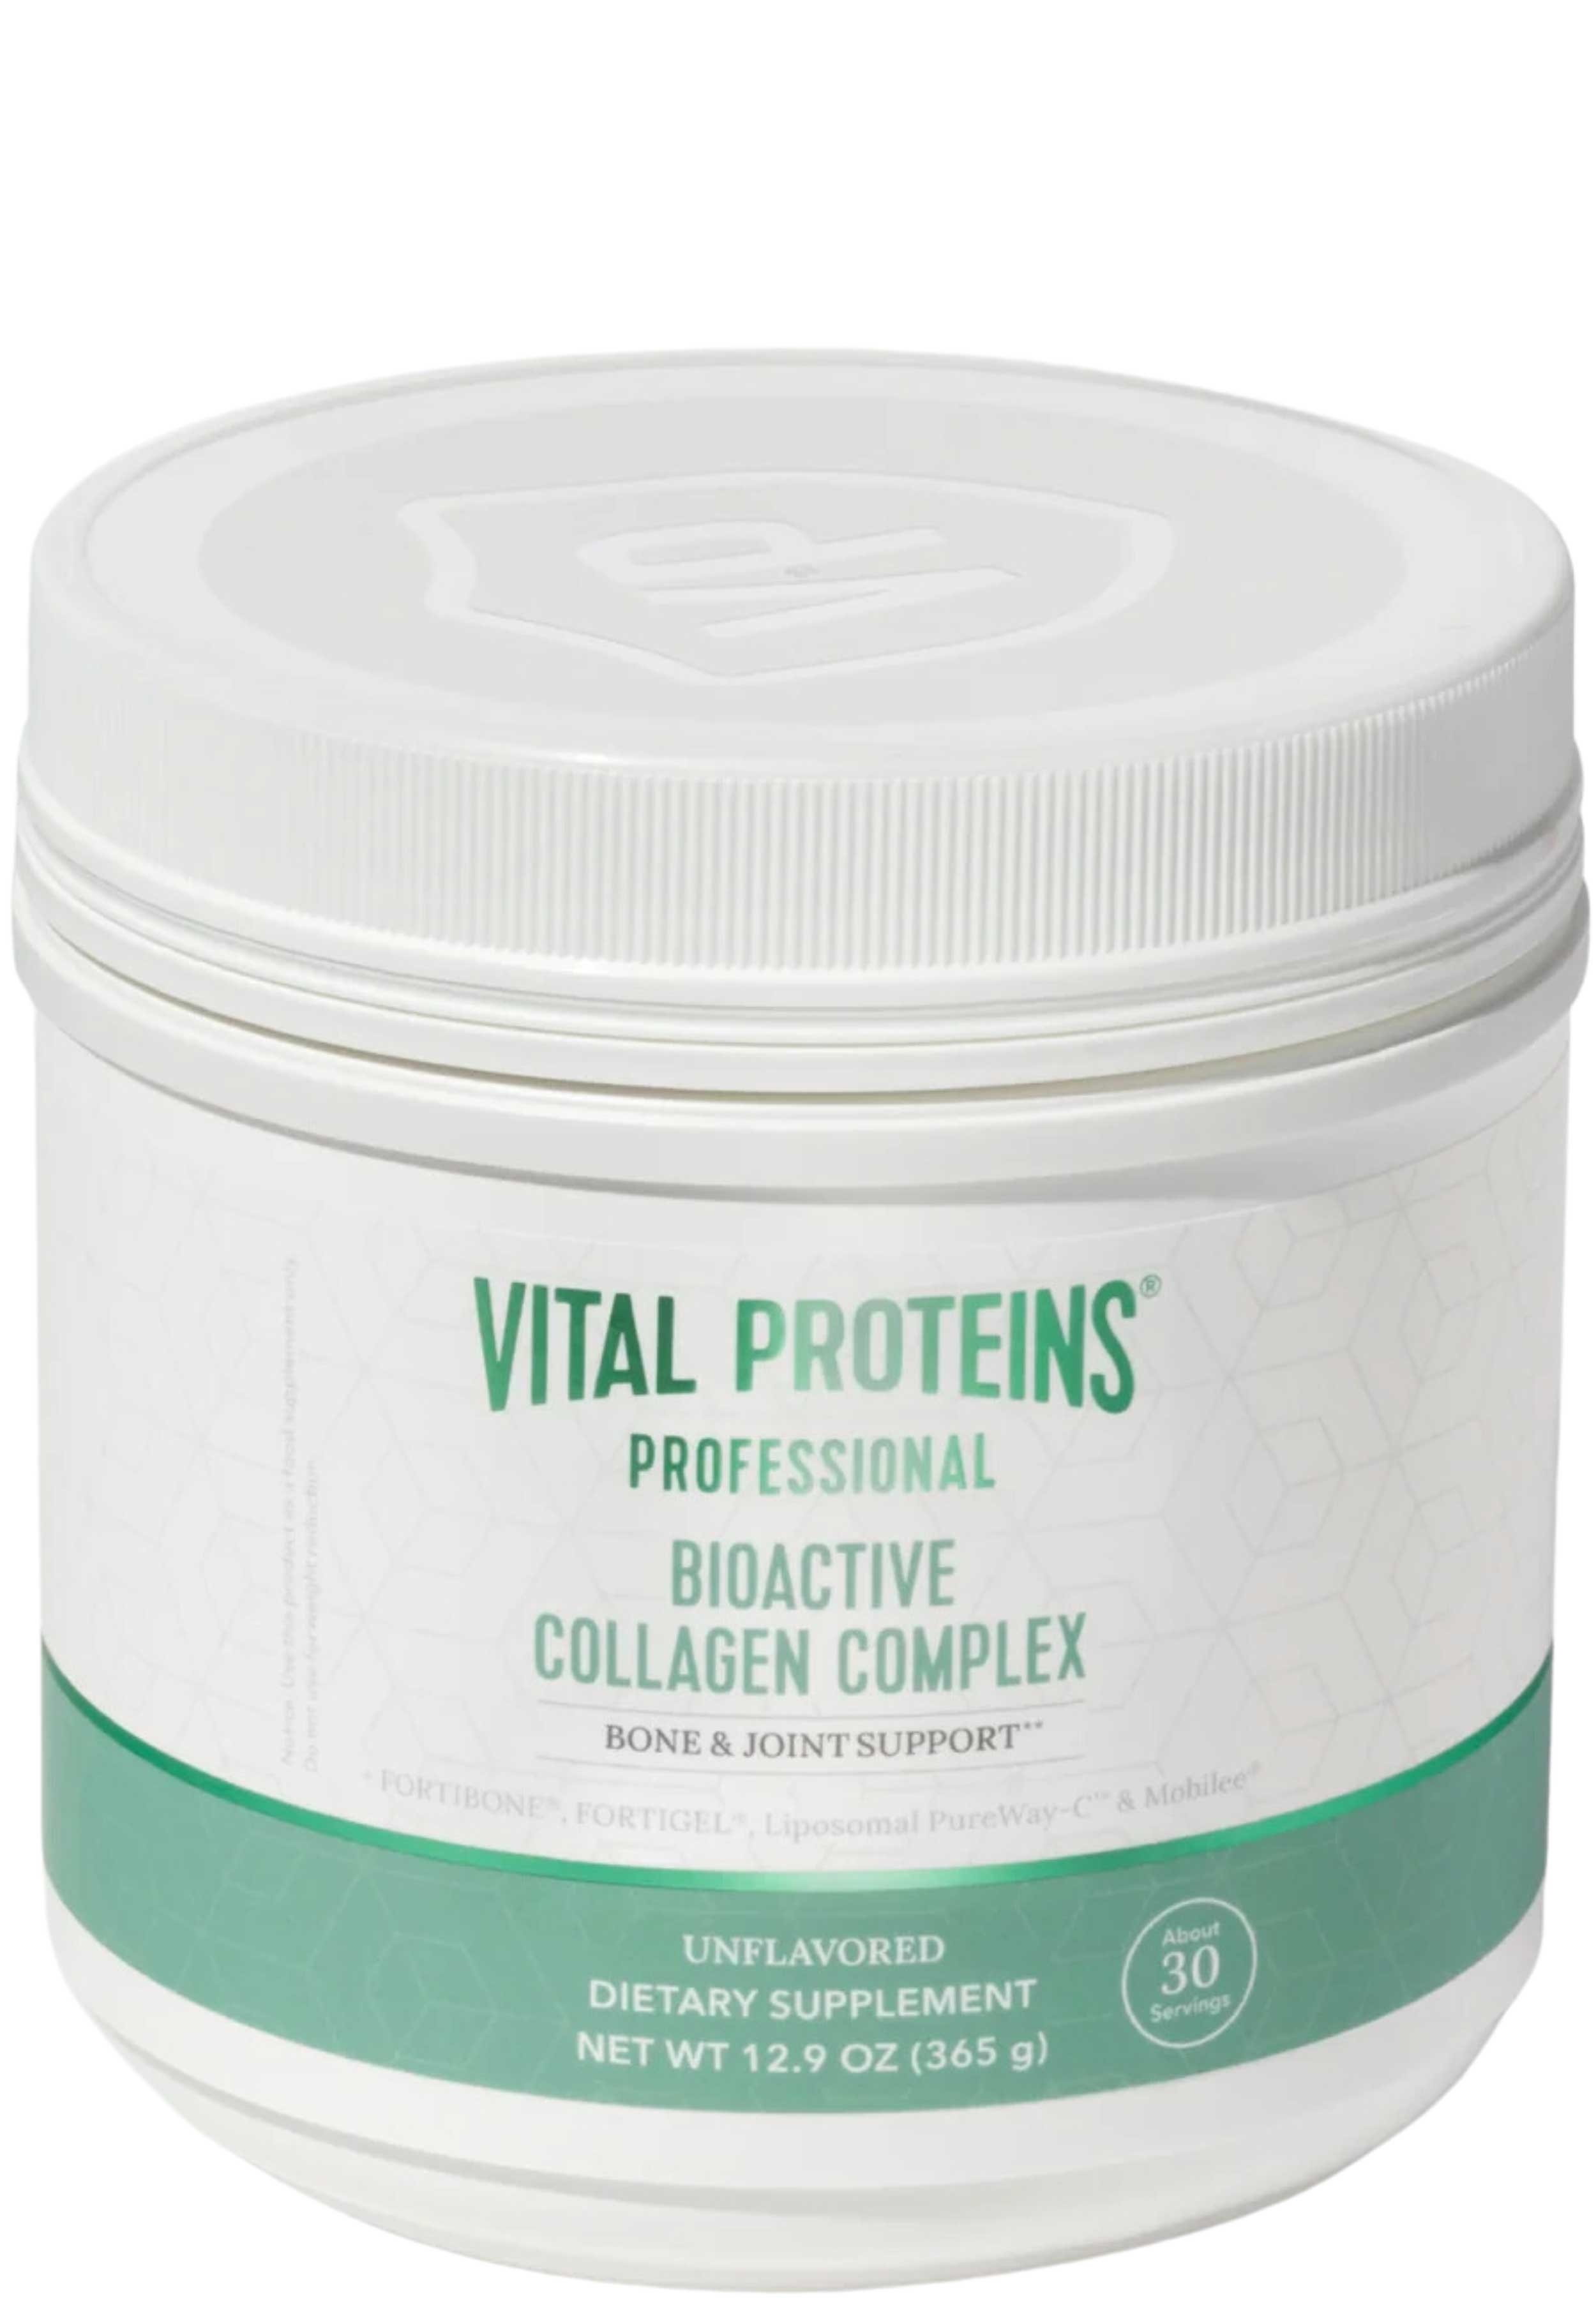 Vital Proteins Bioactive Collagen Complex Bone and Joint Support